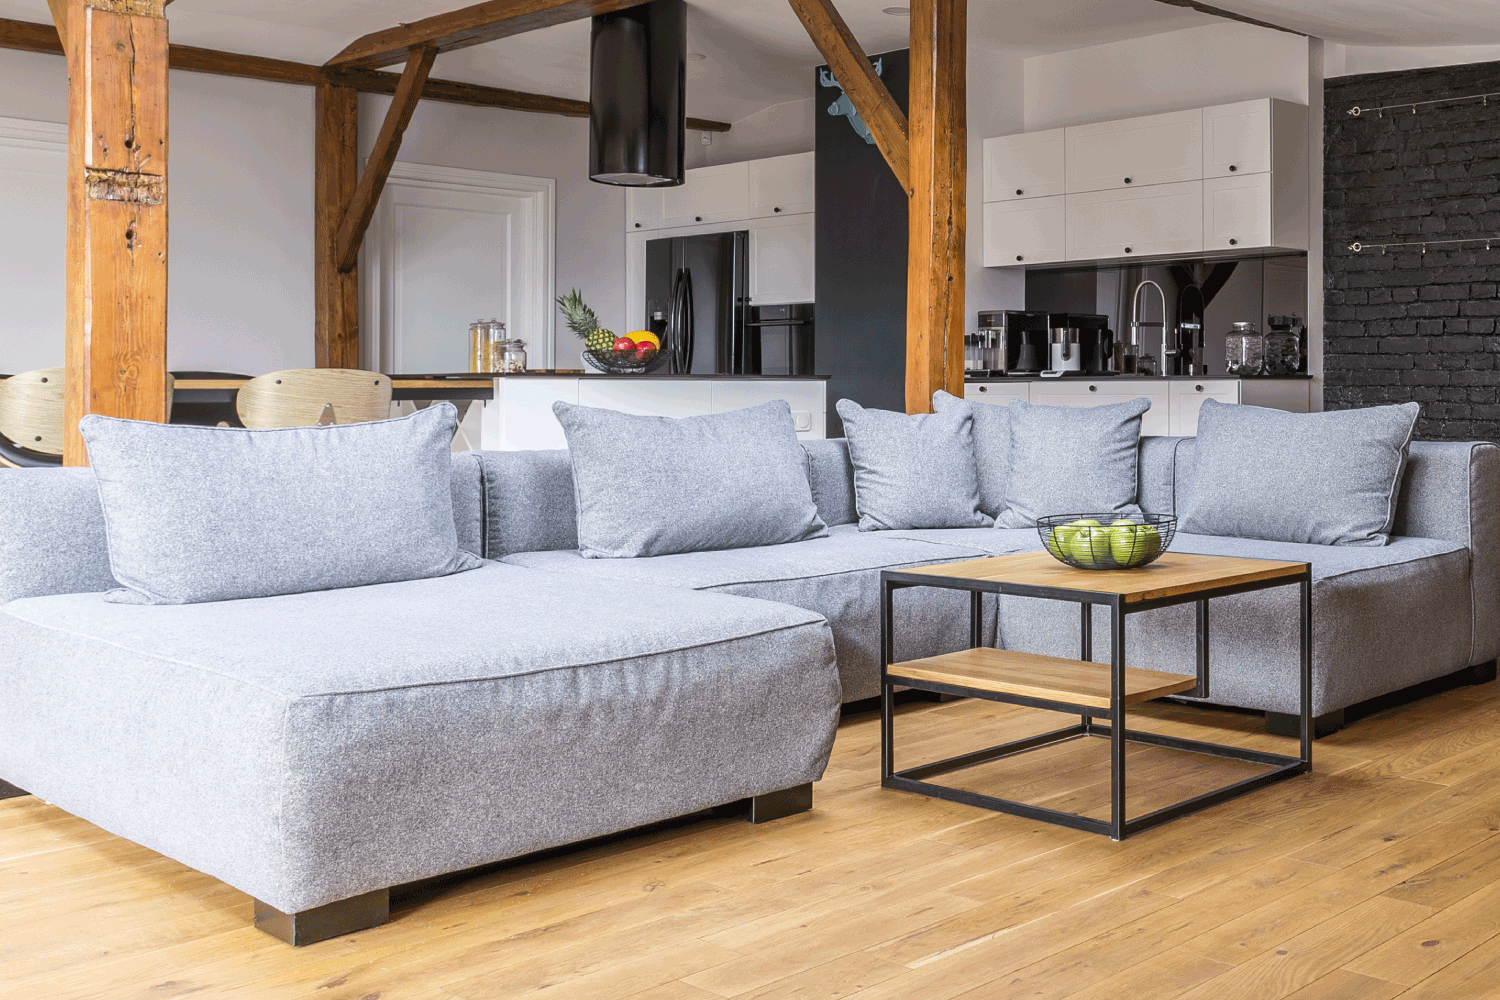 Modern loft open space apartment with wooden beams and floor, simple modern furniture, gray sofa, coffee table, brick wall. Second Tone As Fireplace Accent